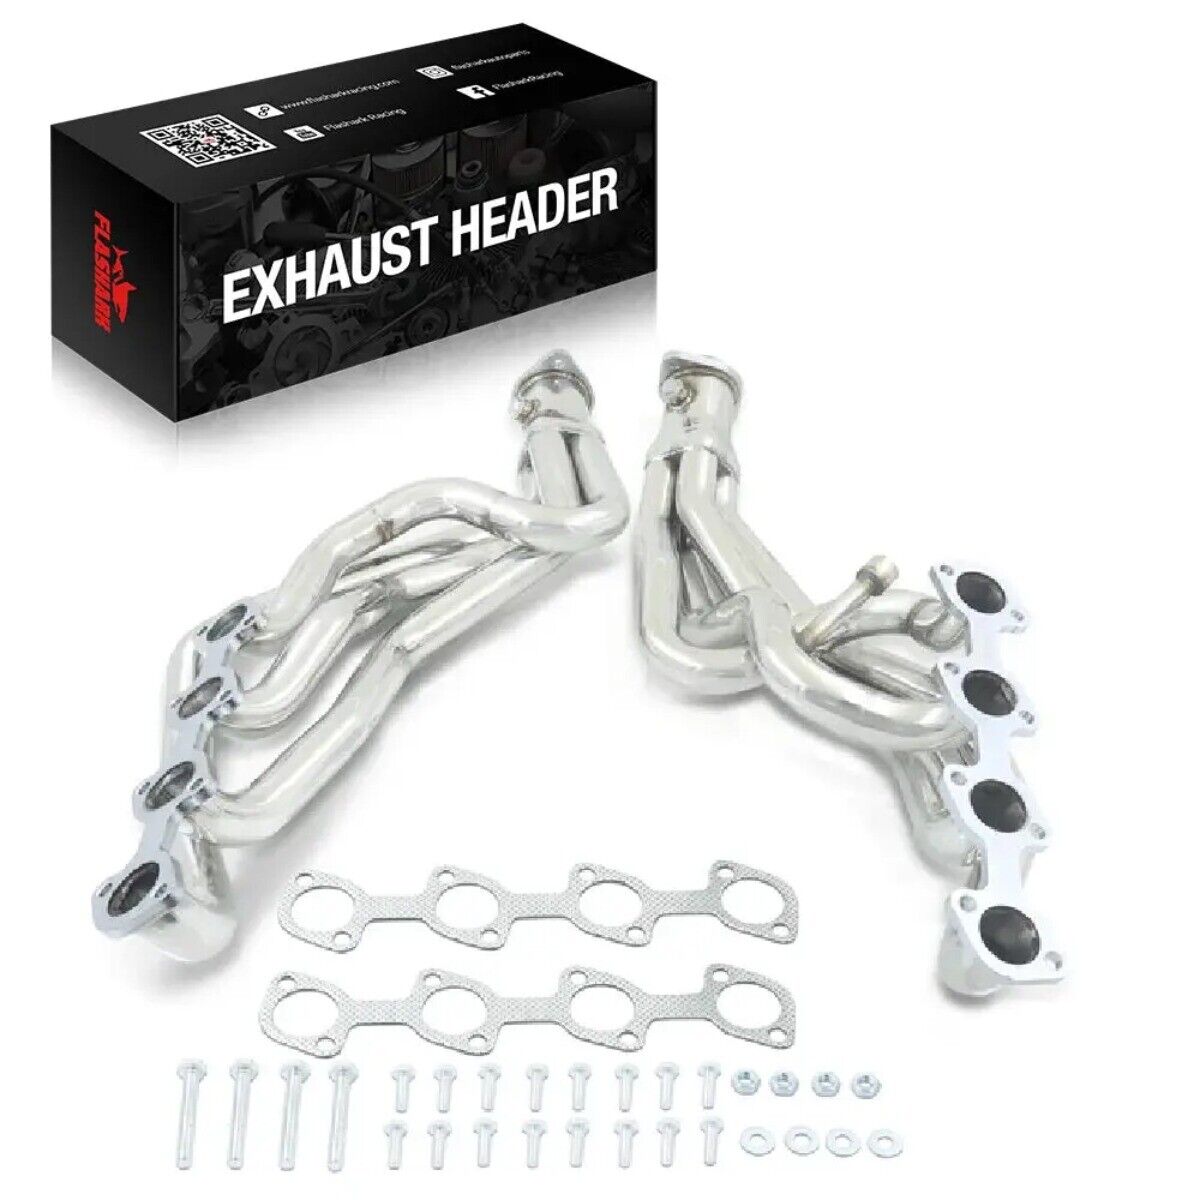 Flashark Exhaust Headers Fit 96-04 Ford Mustang Gt 4.6L V8 Stainless Steel NEW